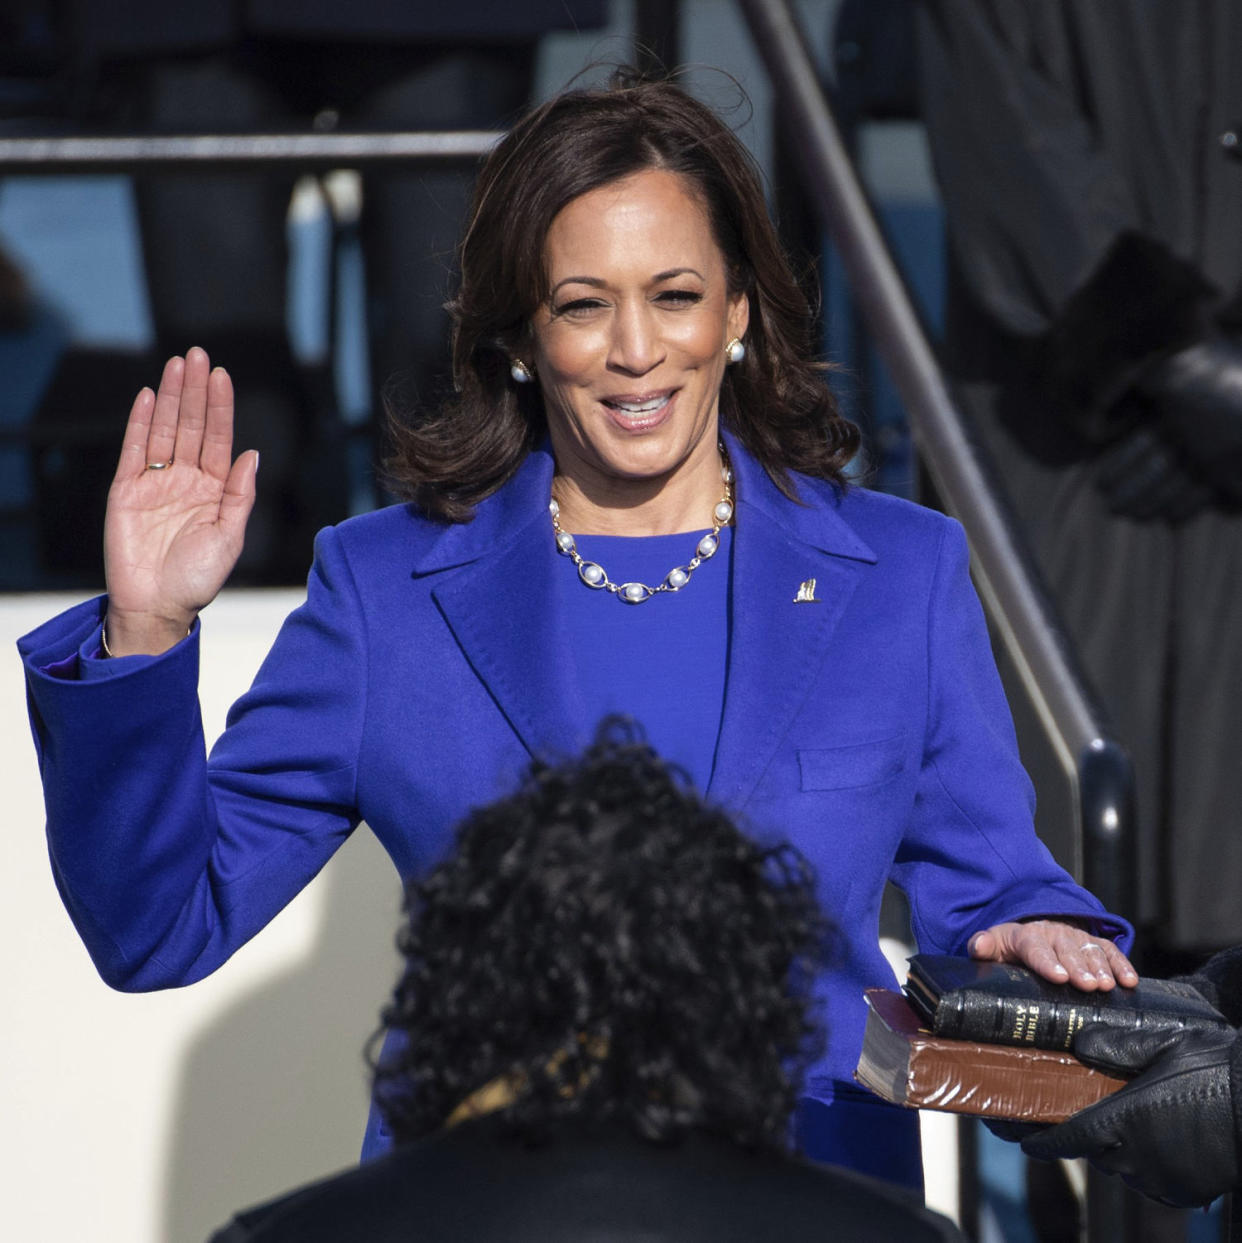 Kamala Harris is sworn in as the 49th US Vice President by Supreme Court Justice Sonia Sotomayor (Saul Loeb / AP)